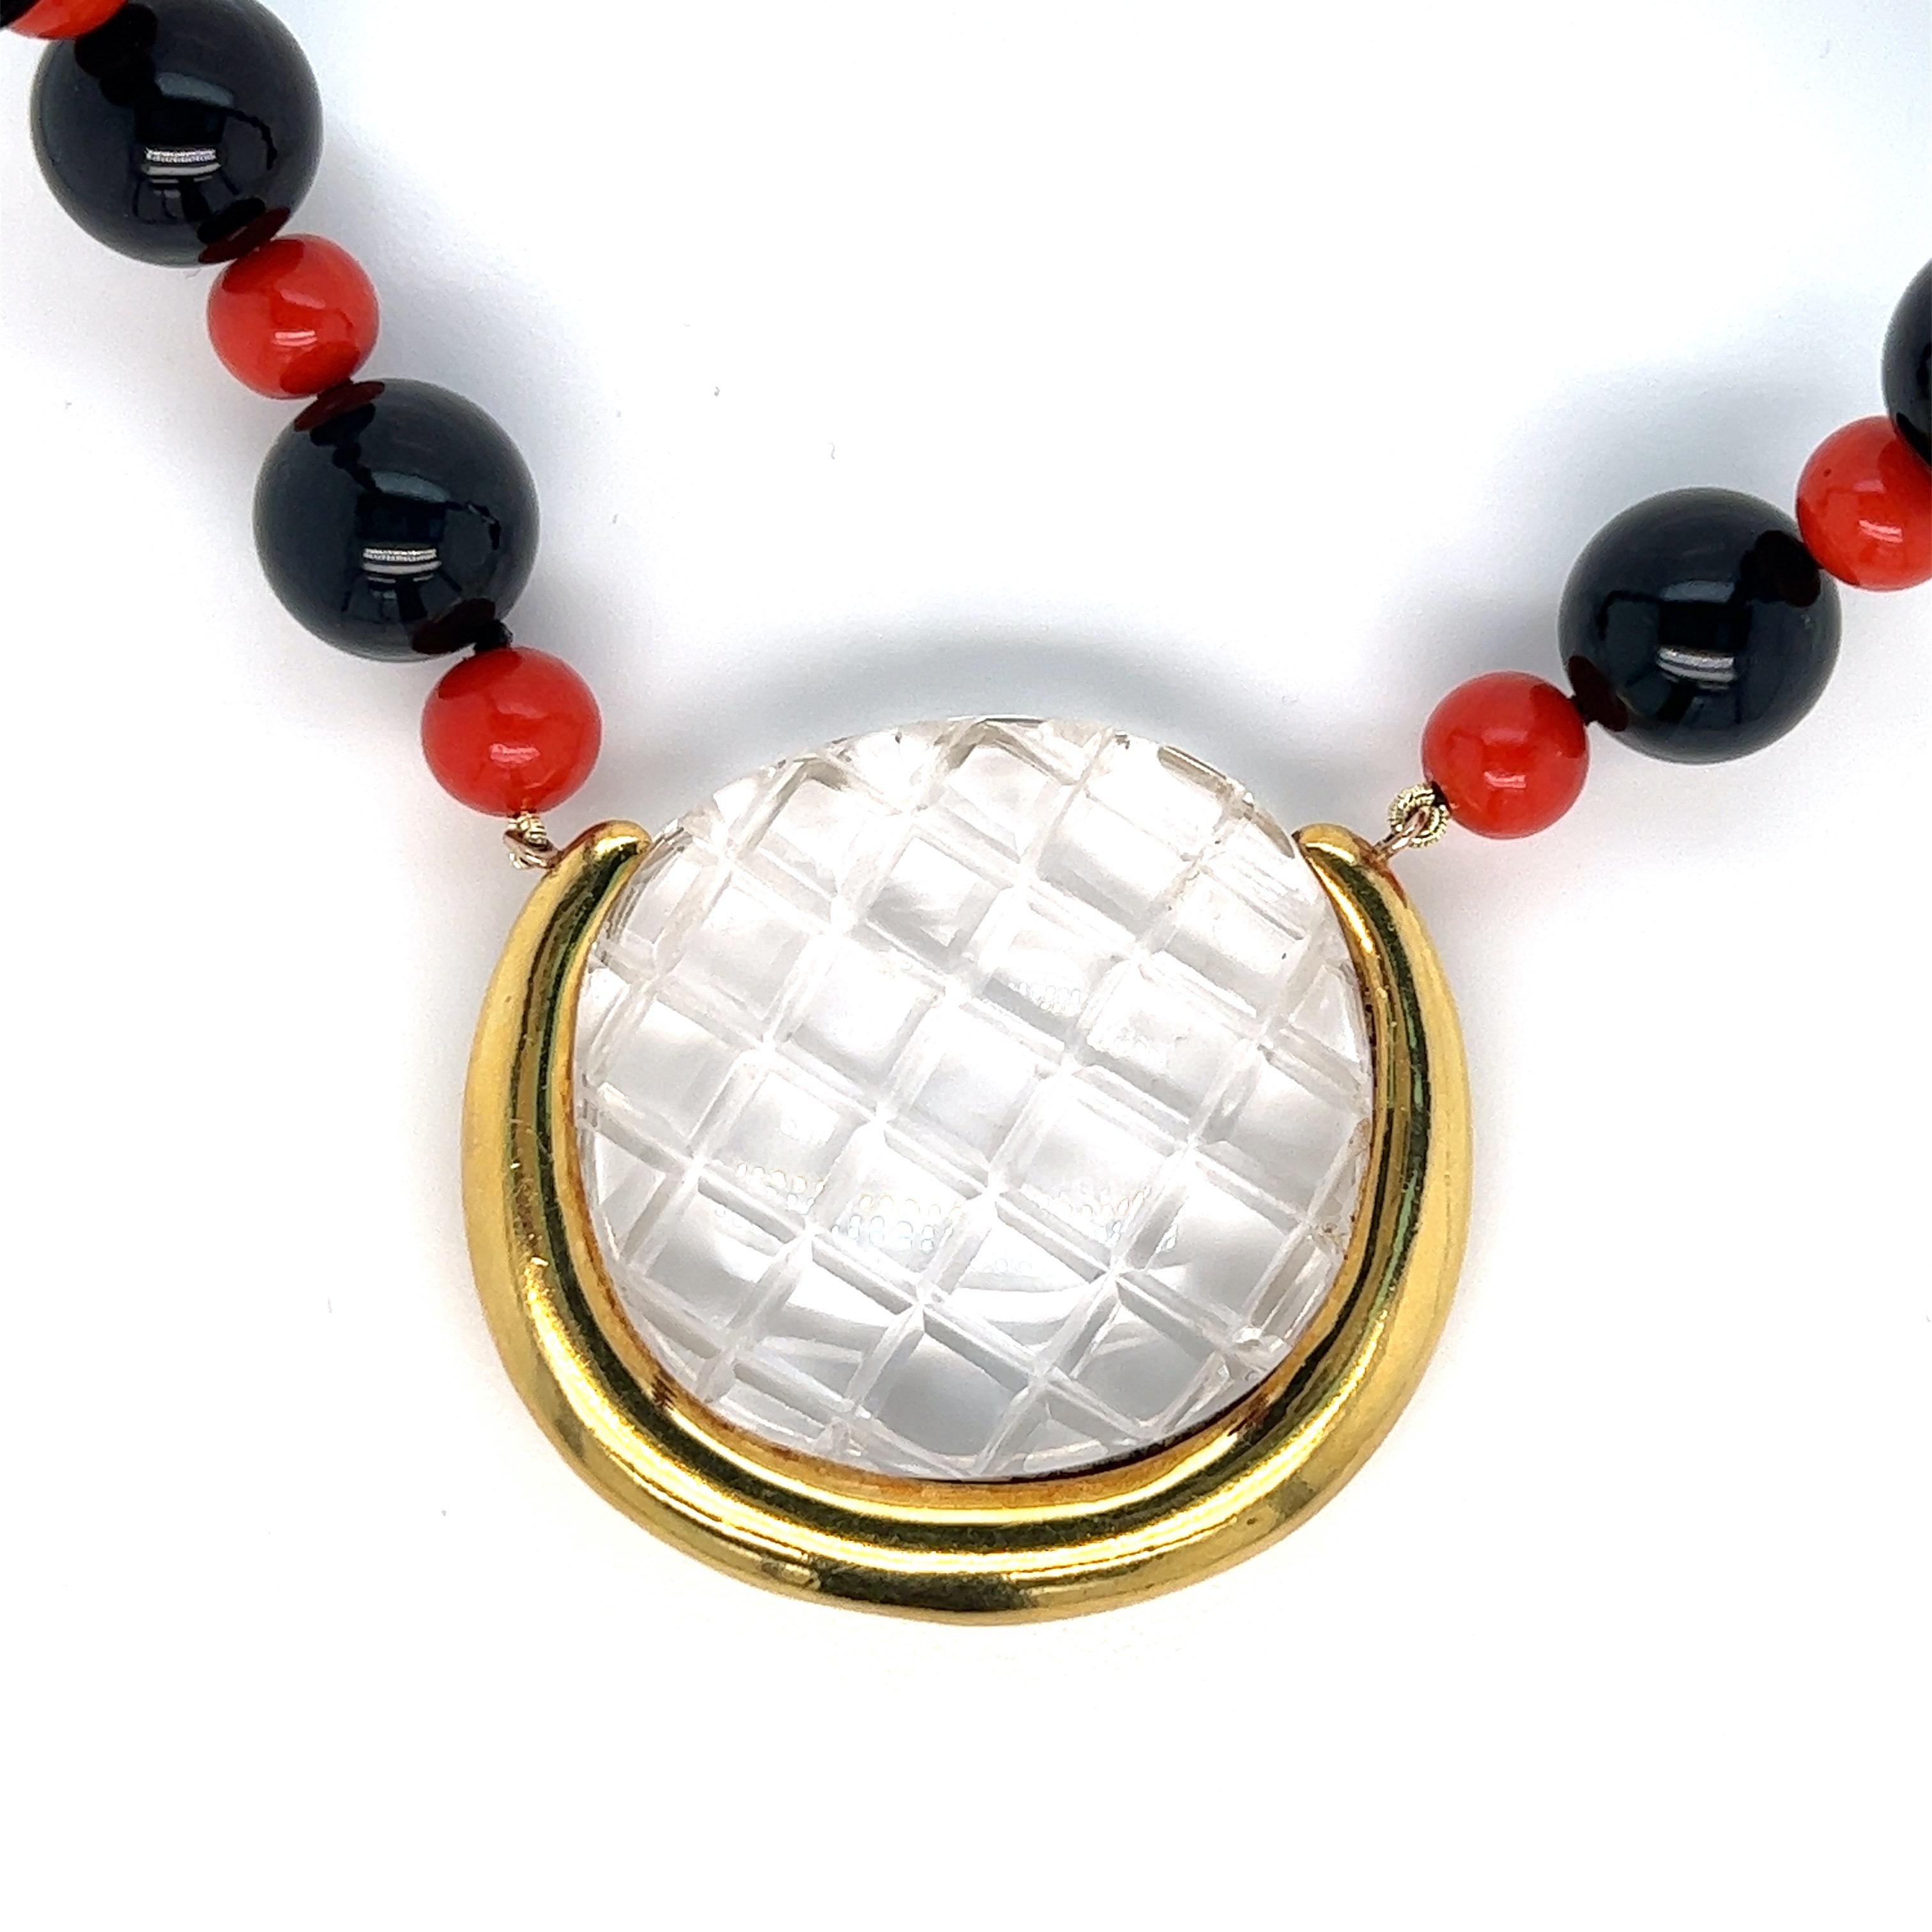 Bead Aldo Cipullo Gold Crystal Pendant with Black Onyx and Coral Necklace